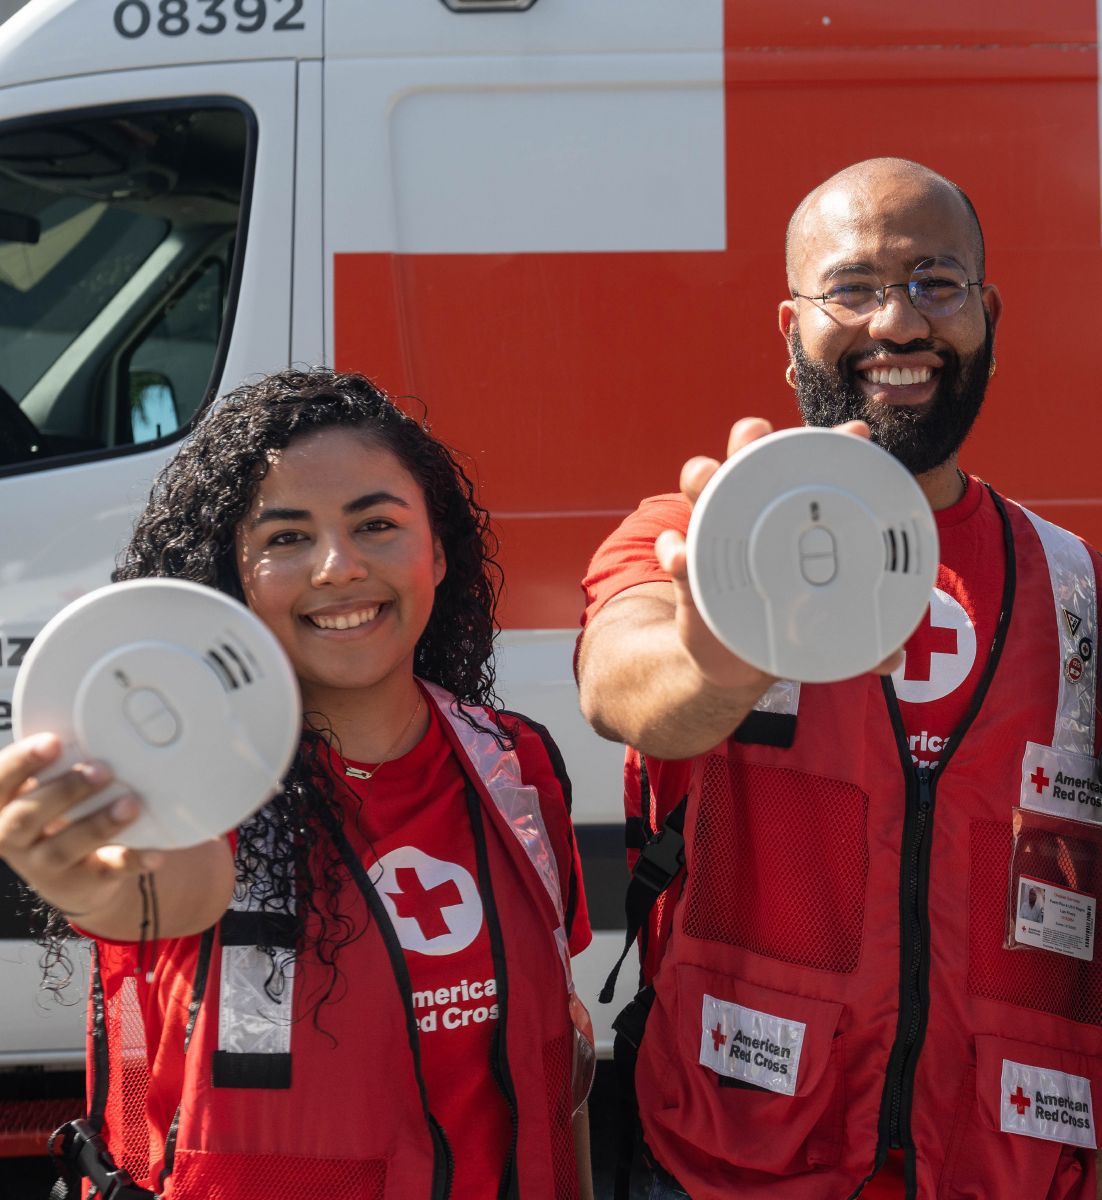 Did you know that if a fire starts in your home you may have as little as two minutes to escape? Early warning from a smoke alarm plus a fire escape plan that has been practiced regularly can save lives. Learn what else to do to keep your loved ones safe: rdcrss.org/2T3N0xU